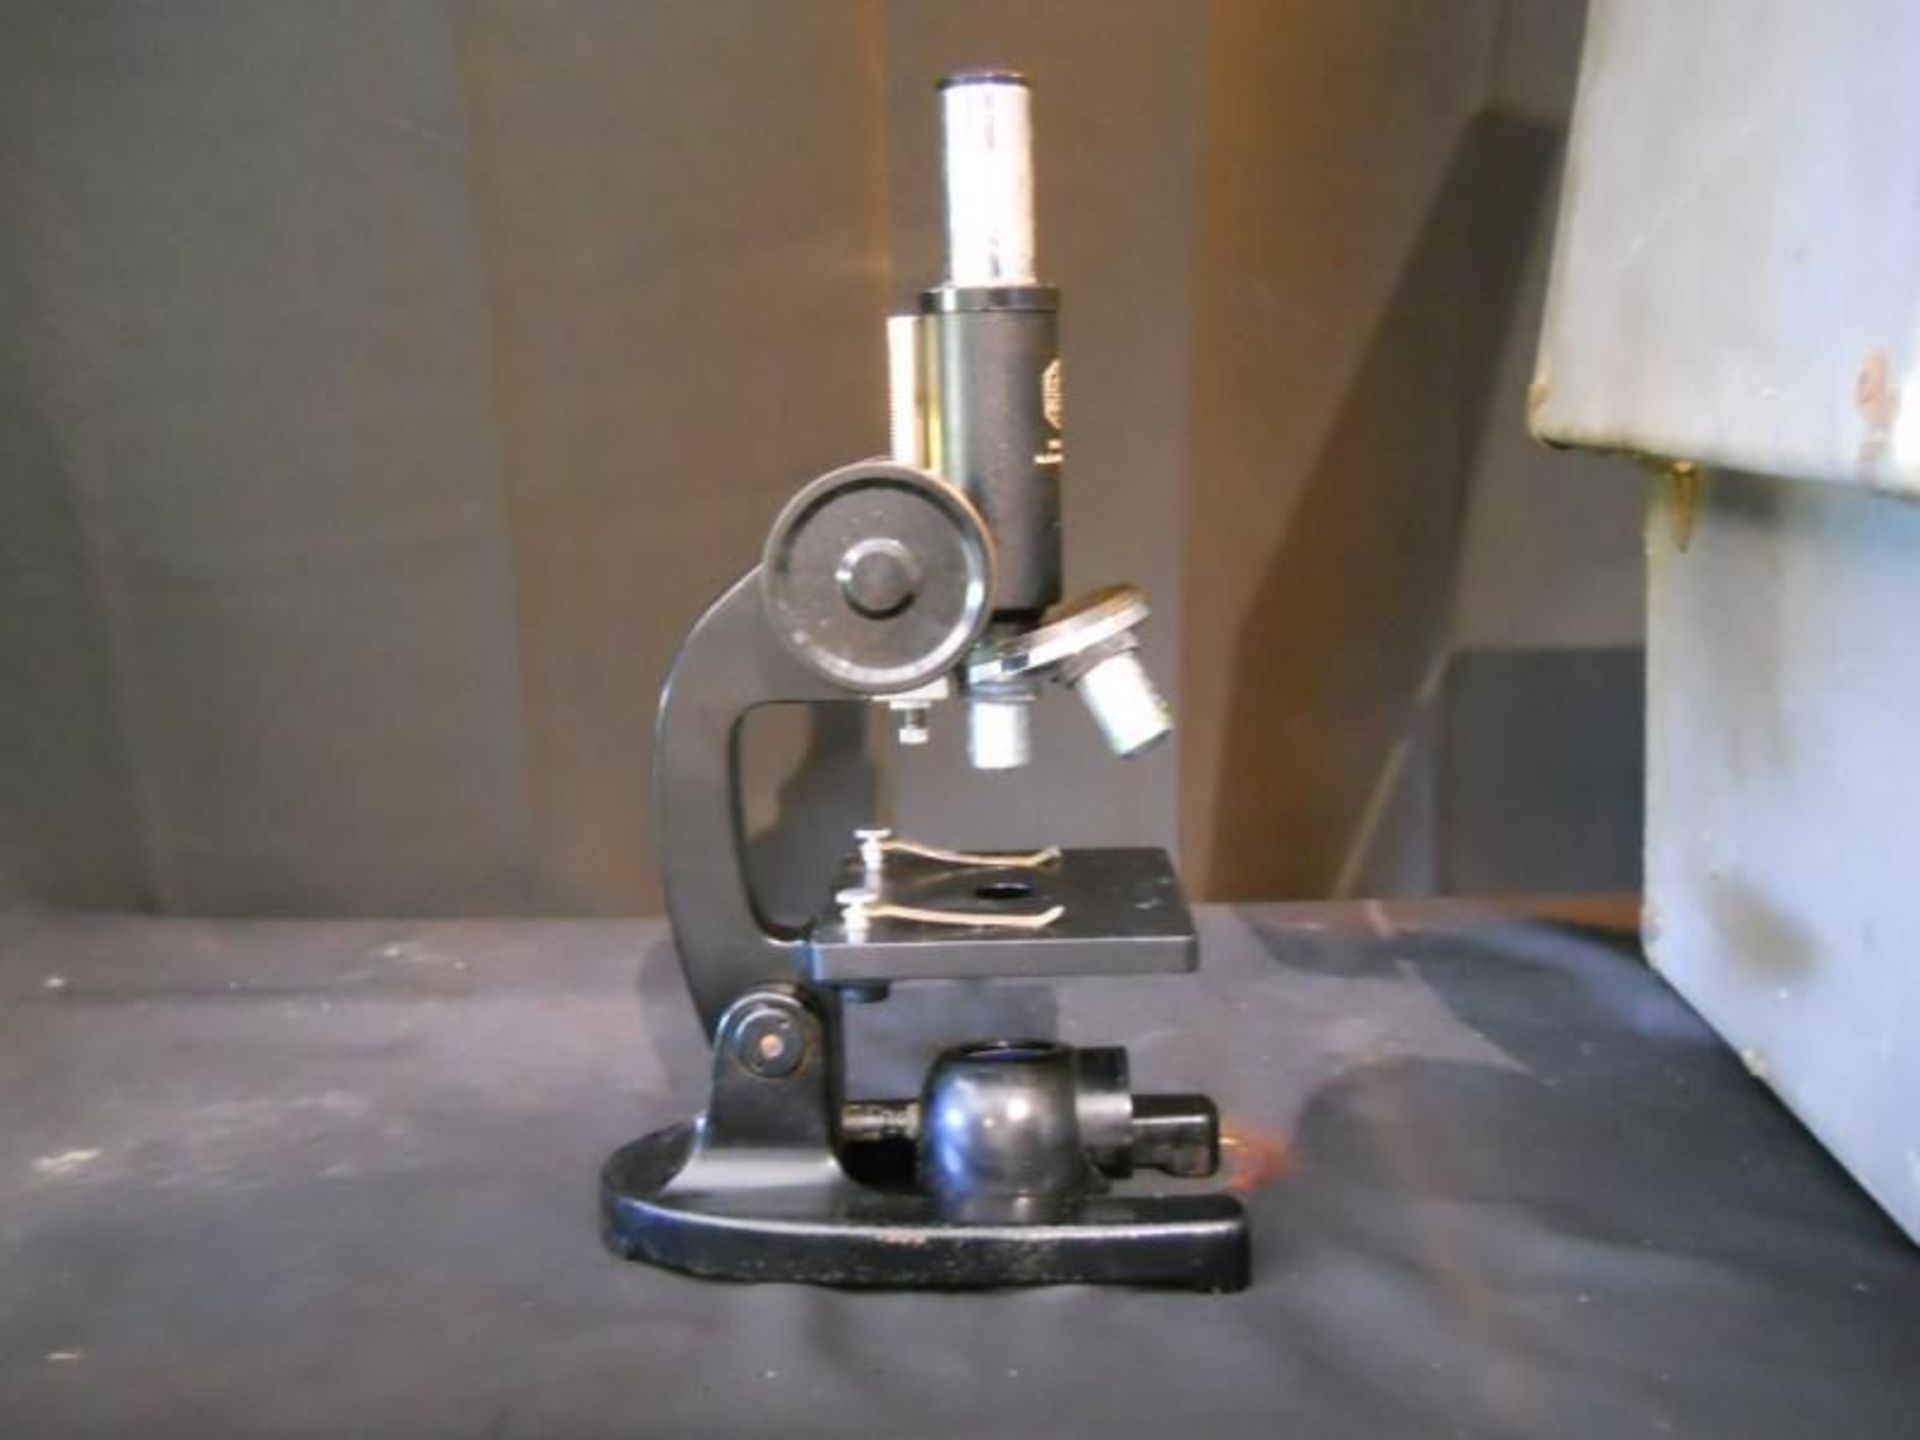 Graf Apsco Student Microscope w/ Objectives & Case, Qty 1, 321468592412 - Image 7 of 12